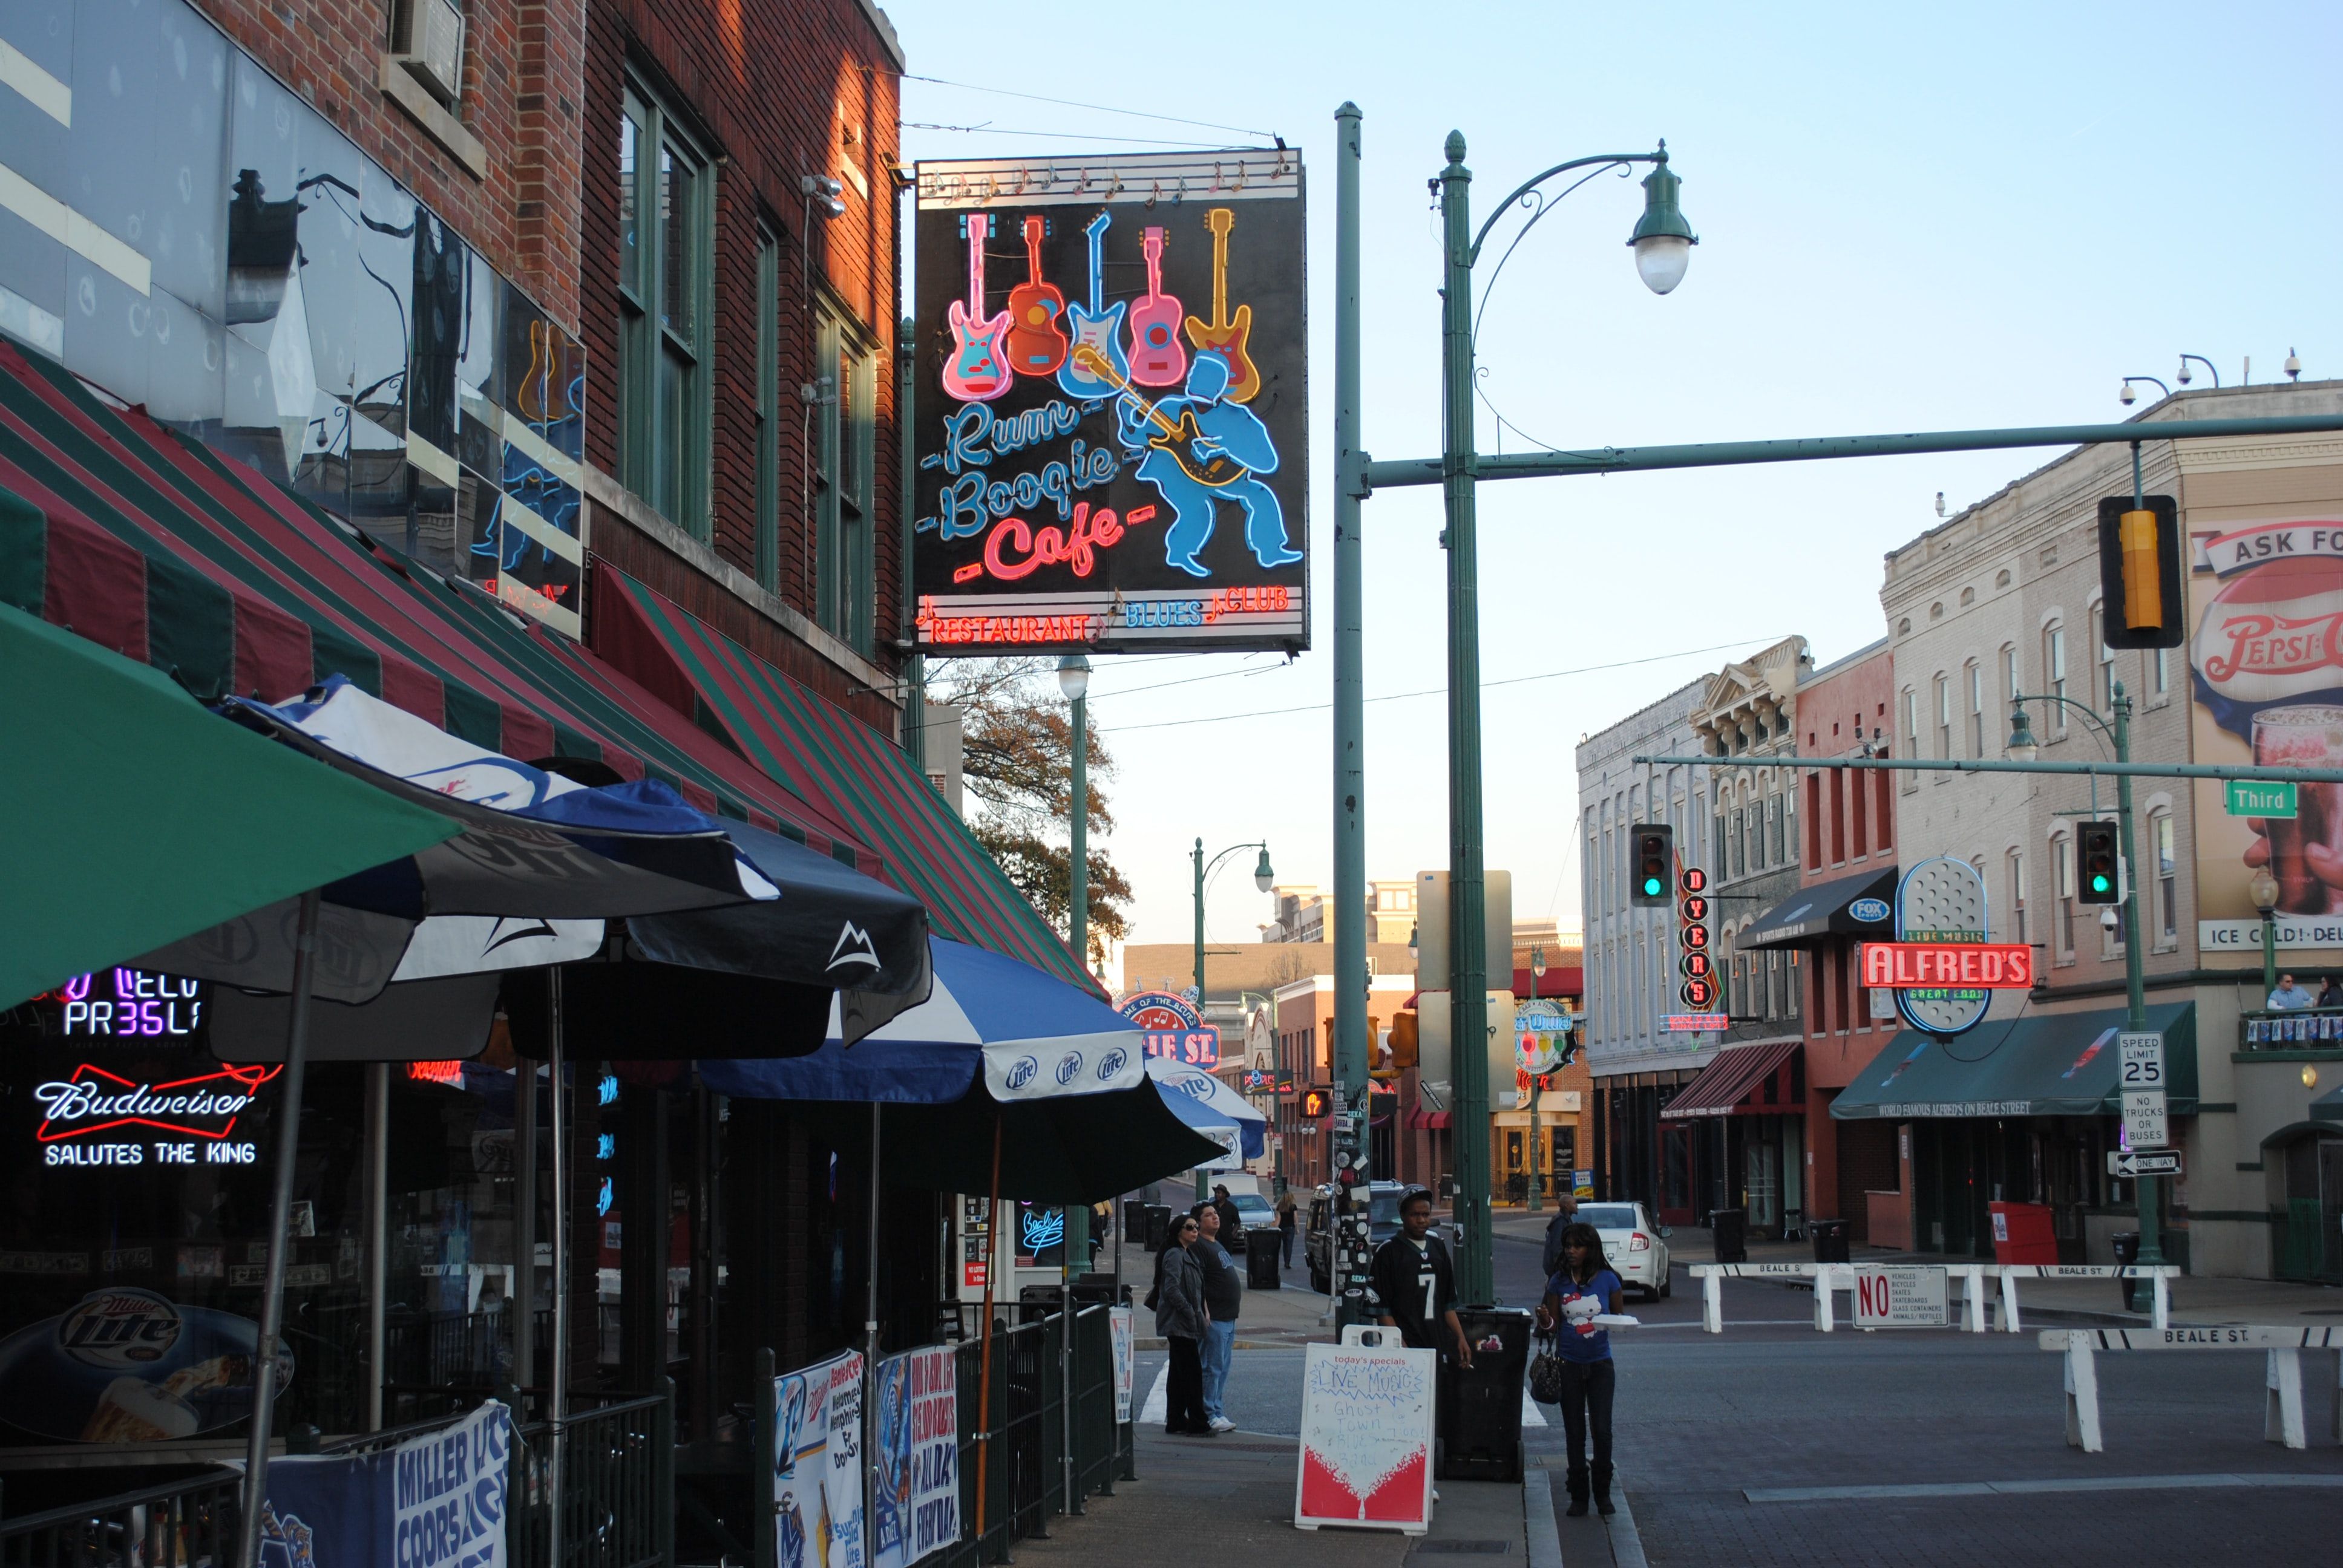 Beale street during the day